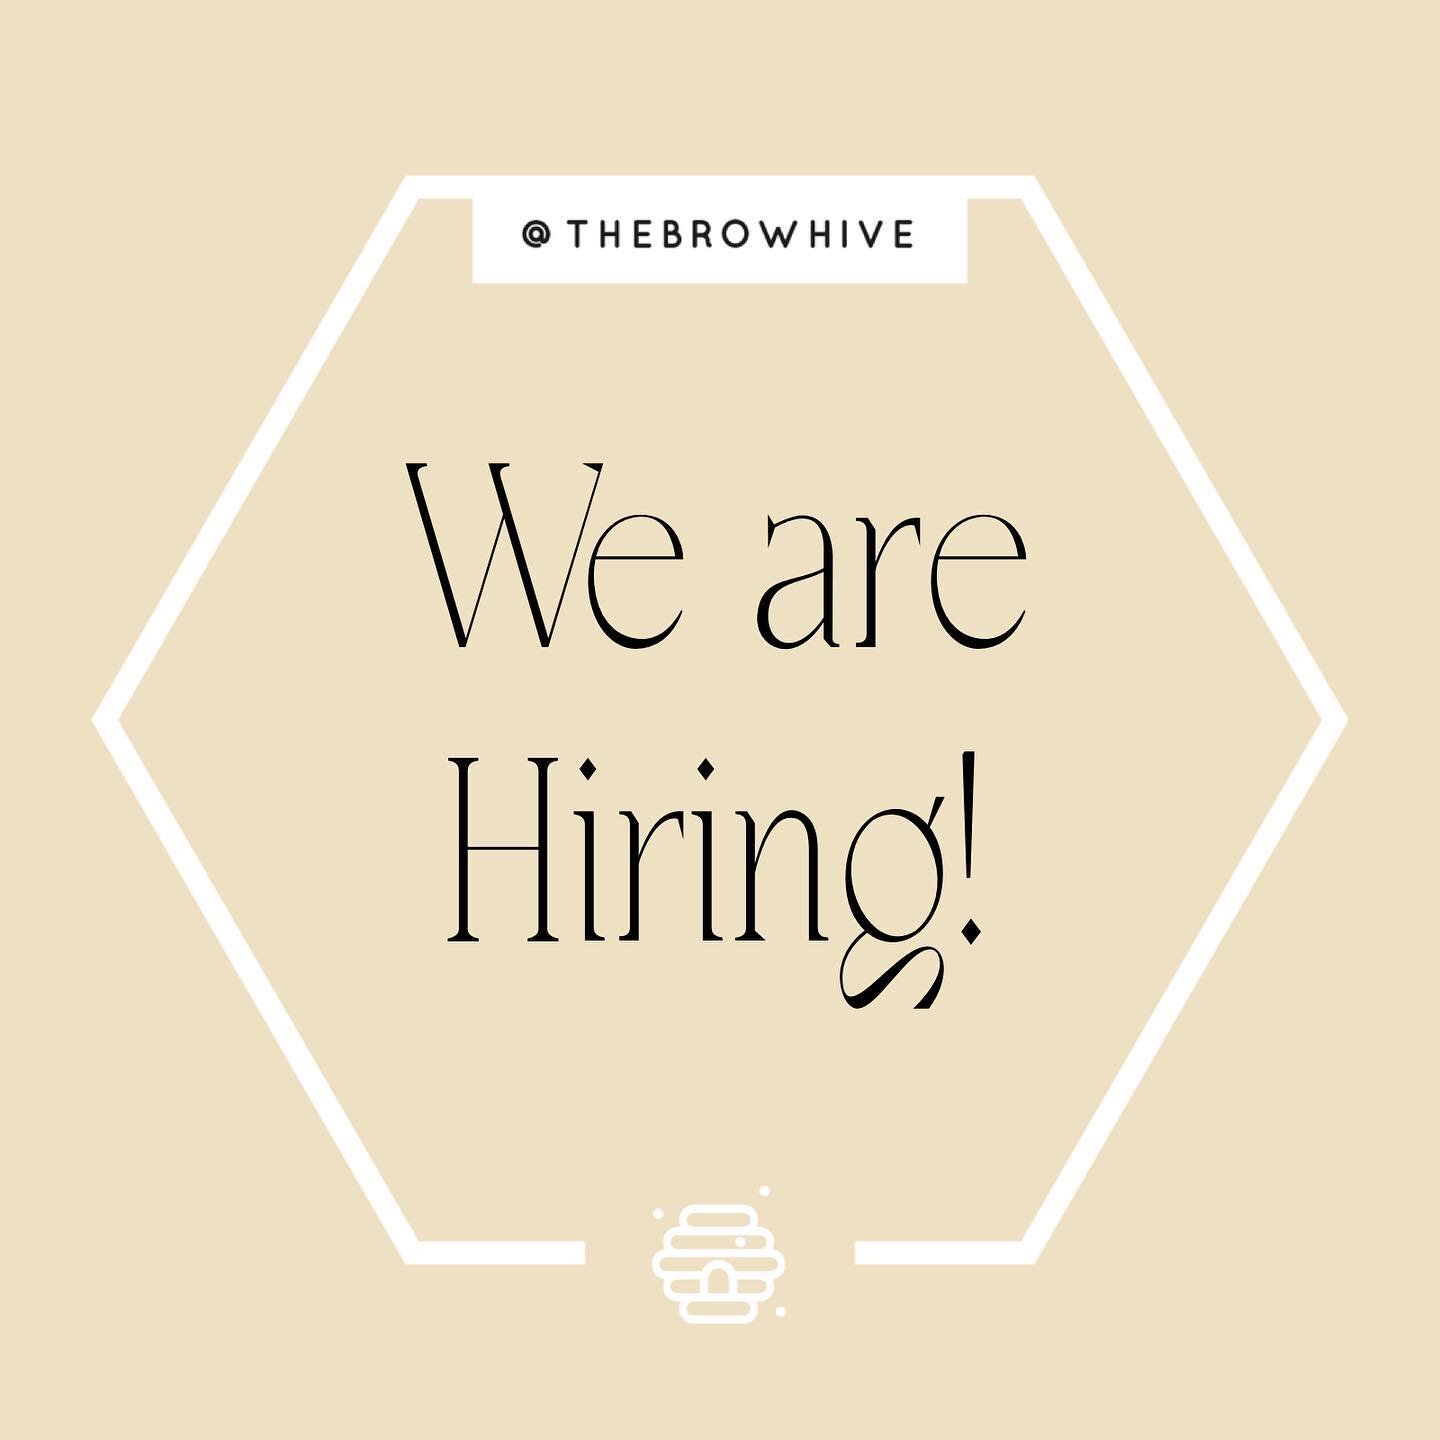 Hey 🍯! We are HIRING! Please email us your resume and a little bit about you!! Can&rsquo;t wait to meet you! 💛 the.browhive@gmail.com 
Z
Z
Z
z
z
z
z
#thebrowhive #browsfromthehive #browhive #brows #utahbrows #browbar #browstudio #utahbrowstudio #ut